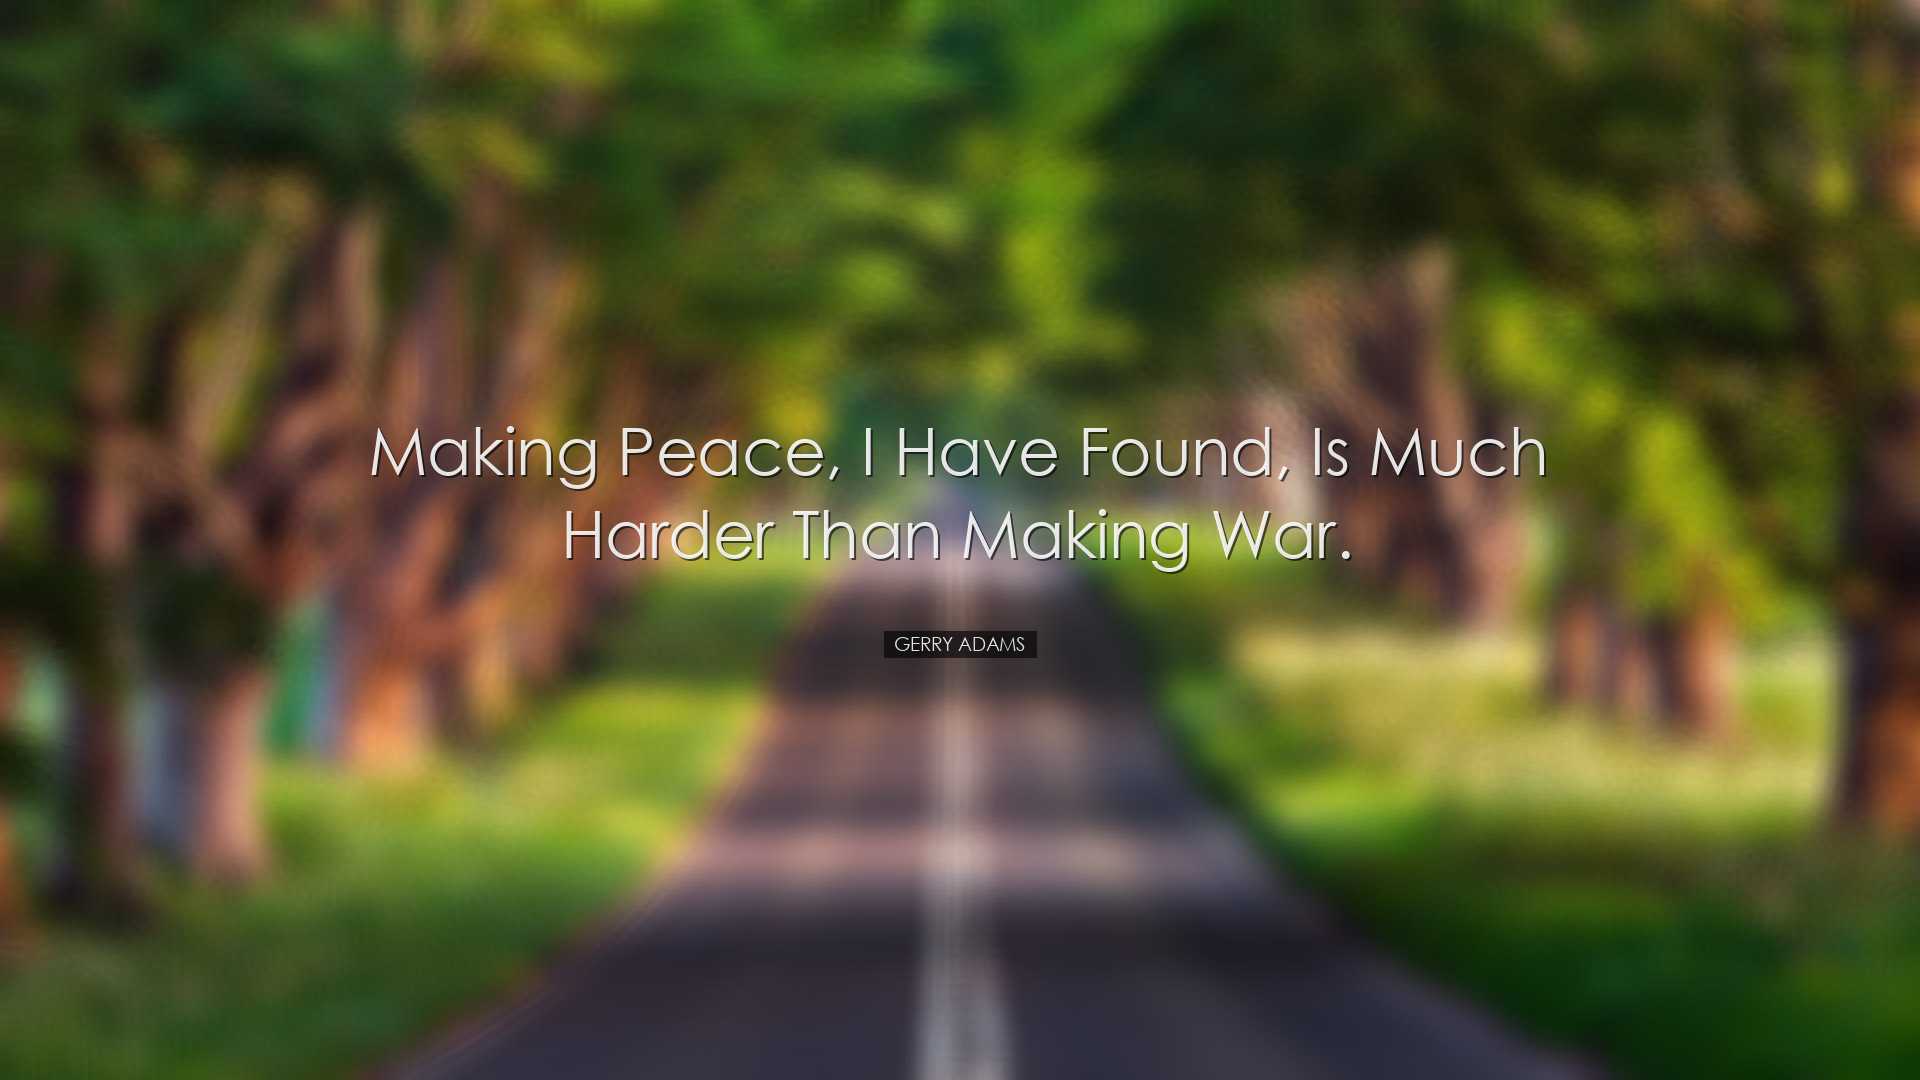 Making peace, I have found, is much harder than making war. - Gerr